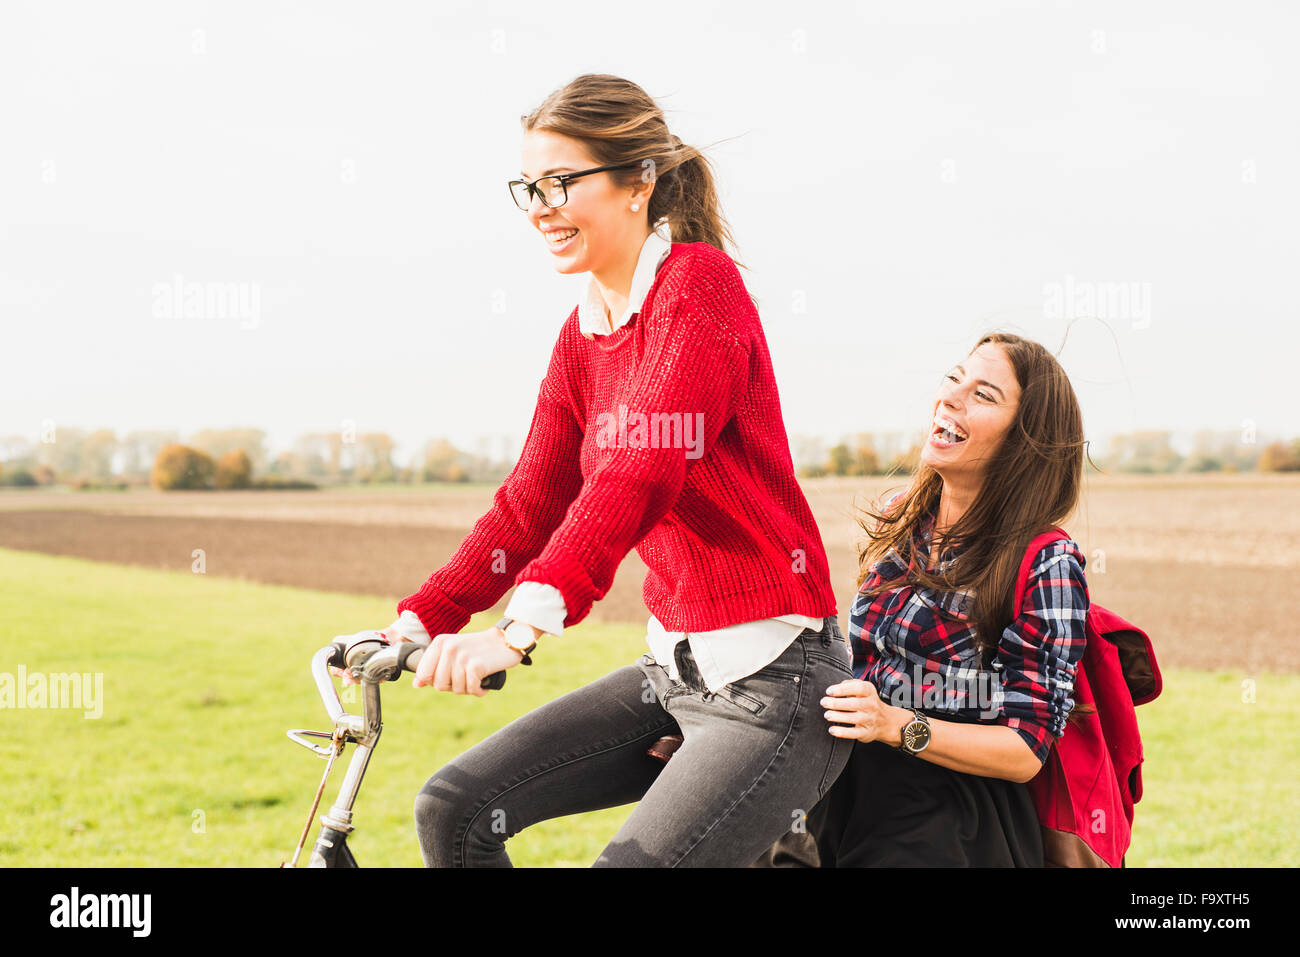 Two happy young women sharing a bicycle in rural landscape Stock Photo